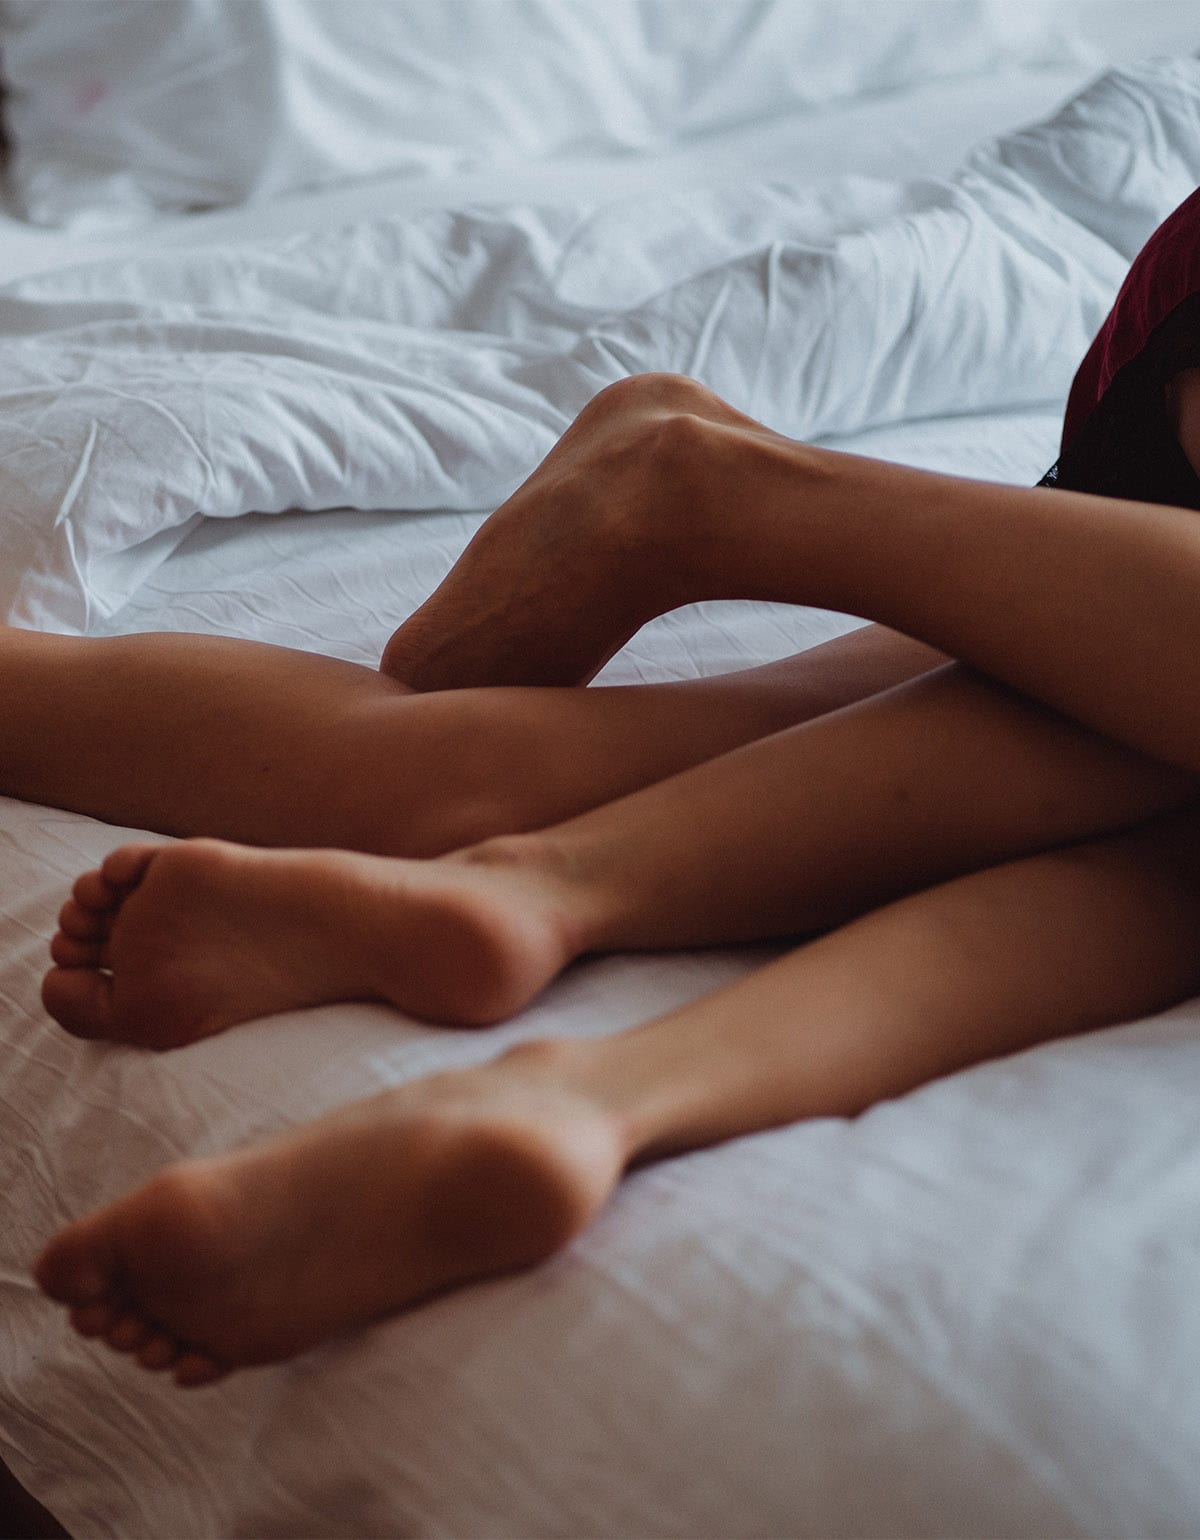 The best sex positions for each phase of your cycle